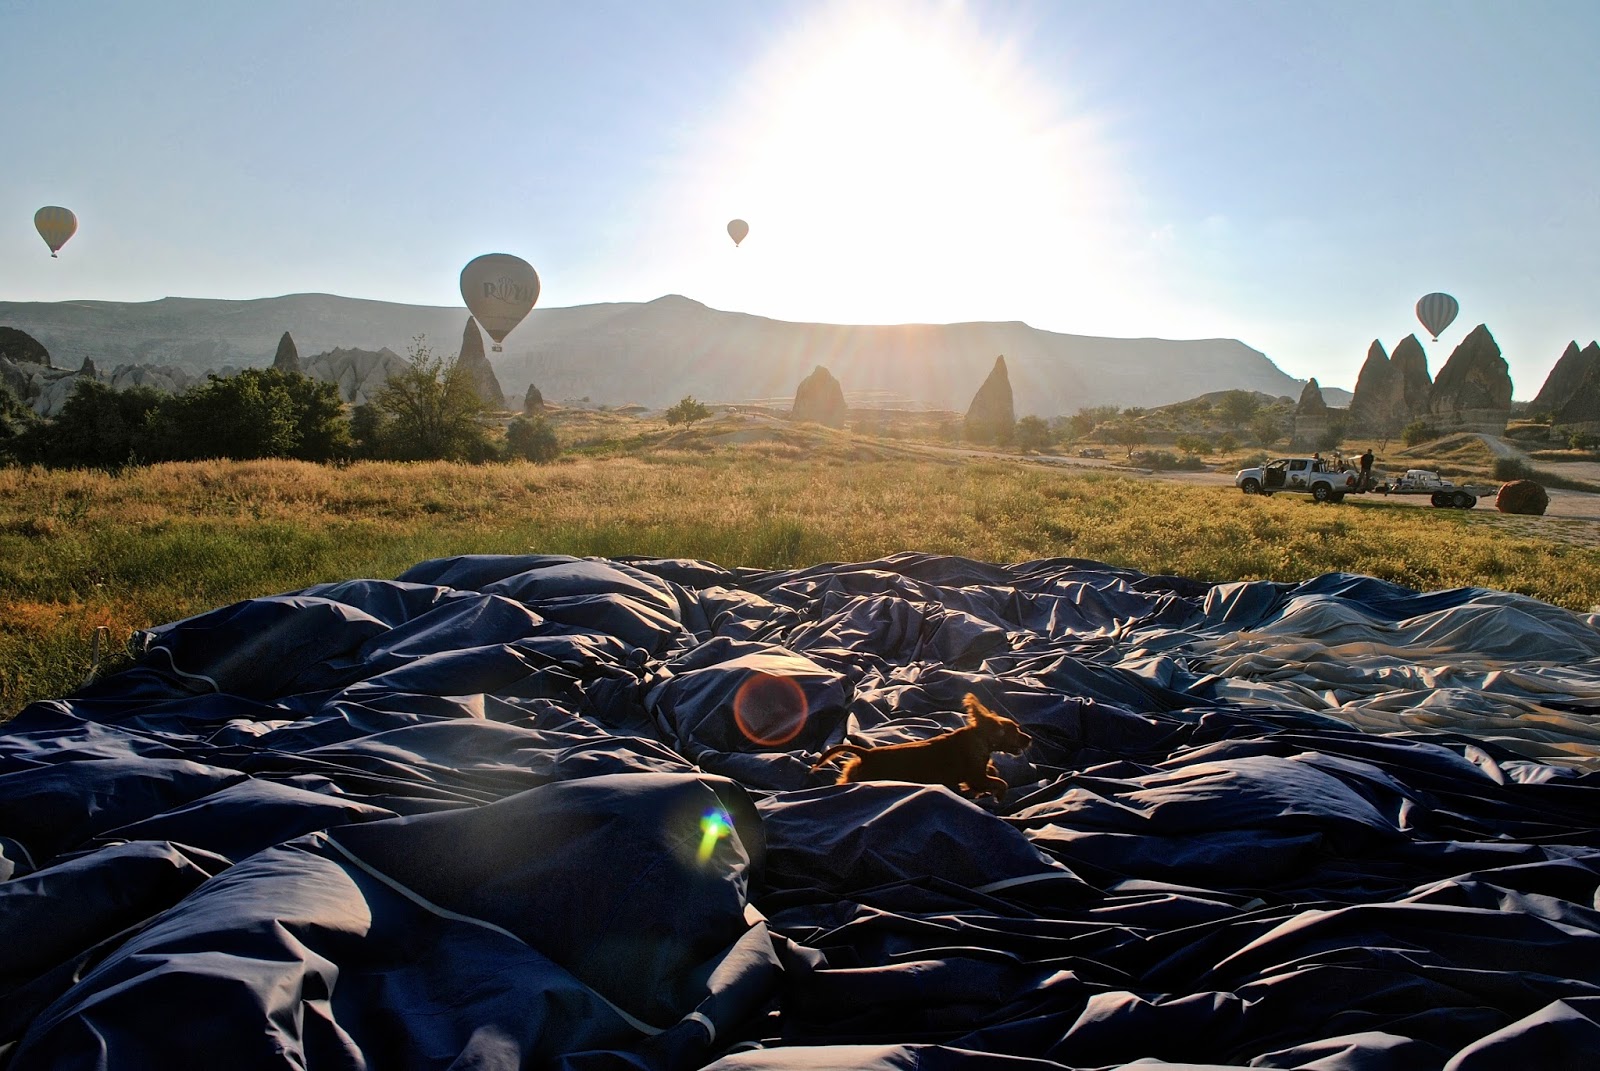 Hot Air Ballooning over Goreme Cappadocia at Sunrise with Butterfly Balloons